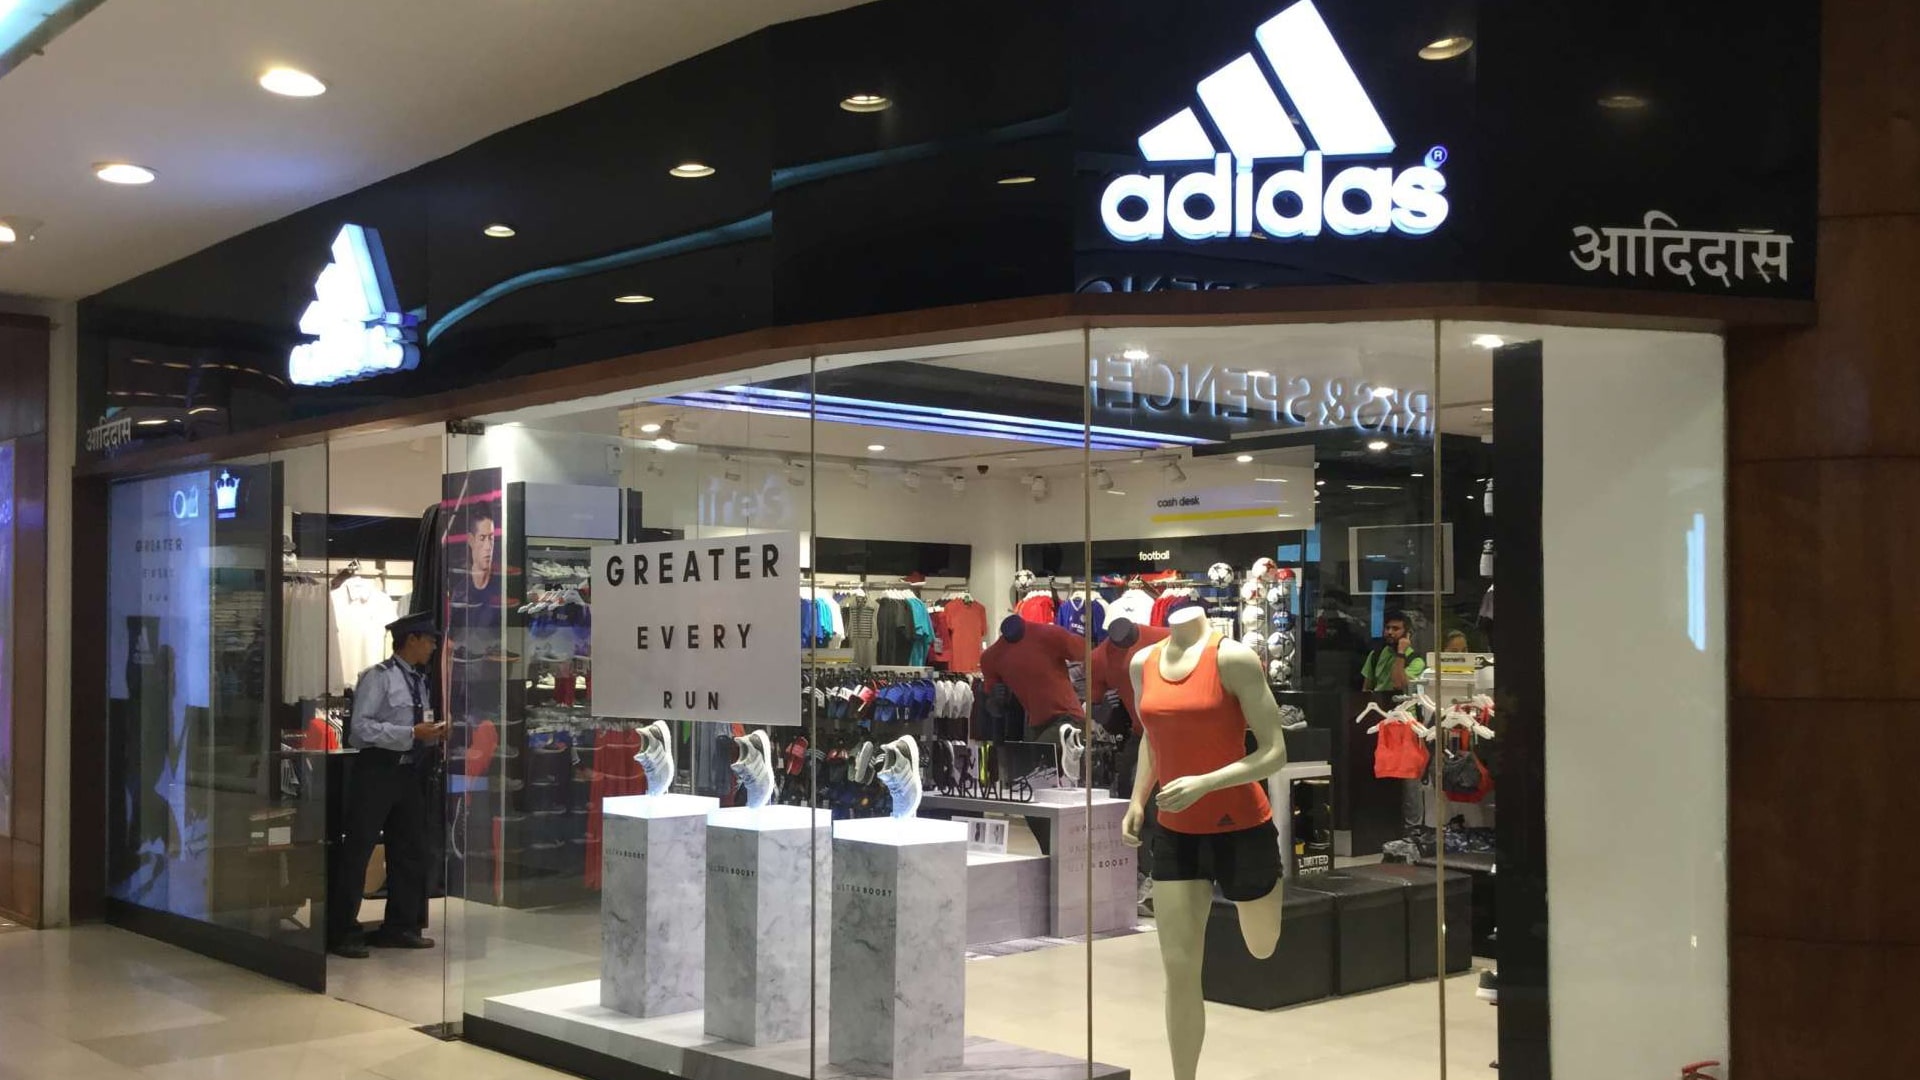 Adidas to enhance retail presence in India, aims to open 50-60 stores per year Retail News India